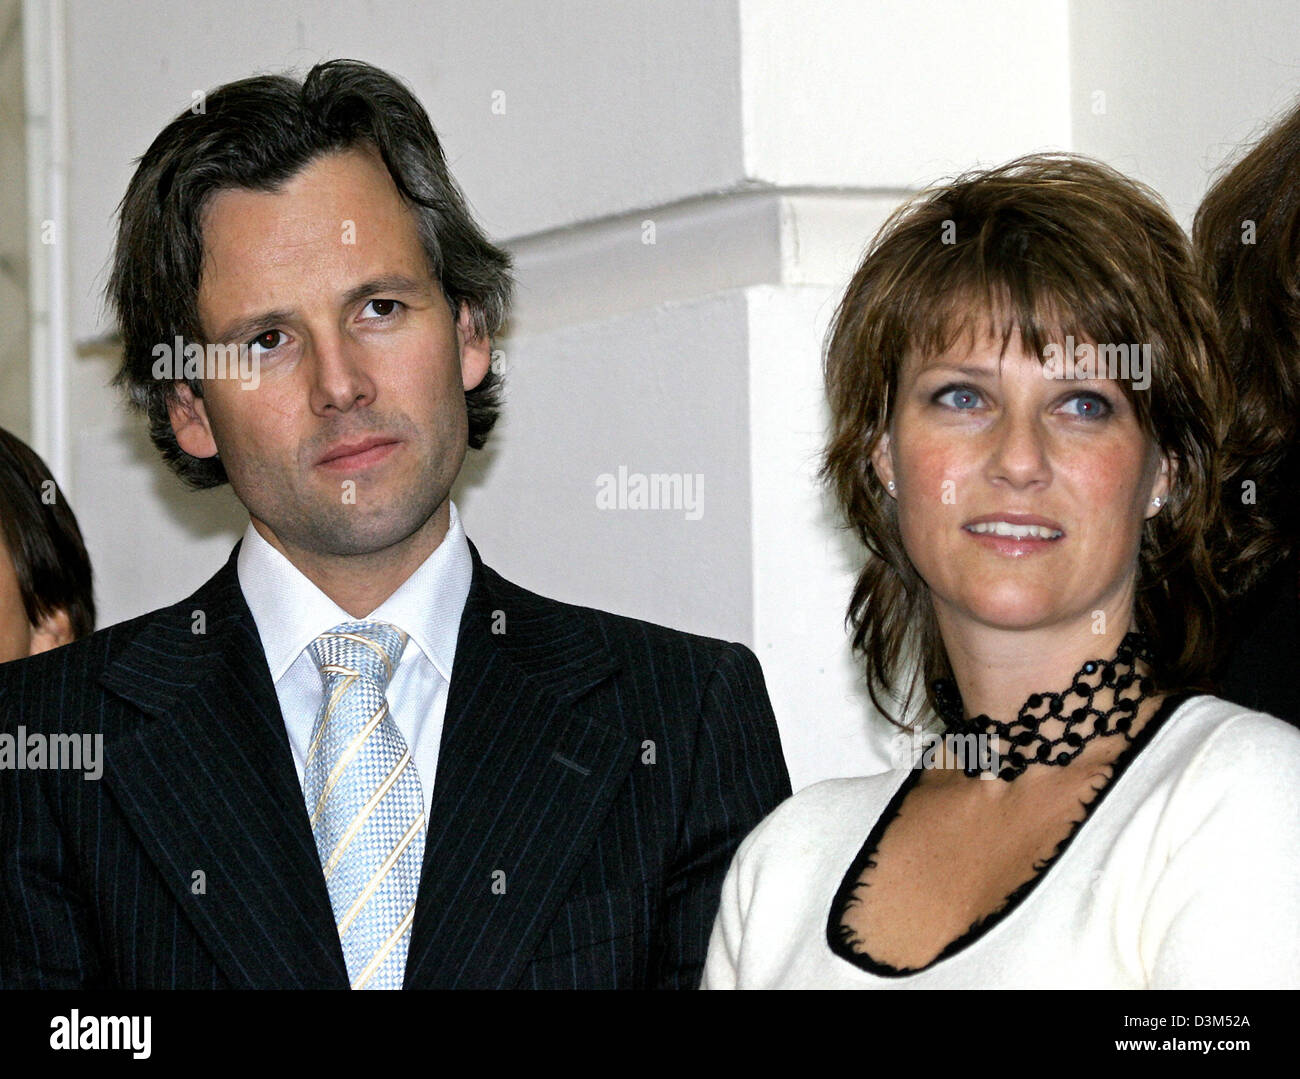 (dpa) - Princess Maertha-Louise of Norway (R) and her husband Ari Behn take part in a function celebrating the 100th birthday of Queen Astrid of Belgium in Brussels, Belgium, Thursday, 17 November 2005. Photo: Albert Nieboer Stock Photo